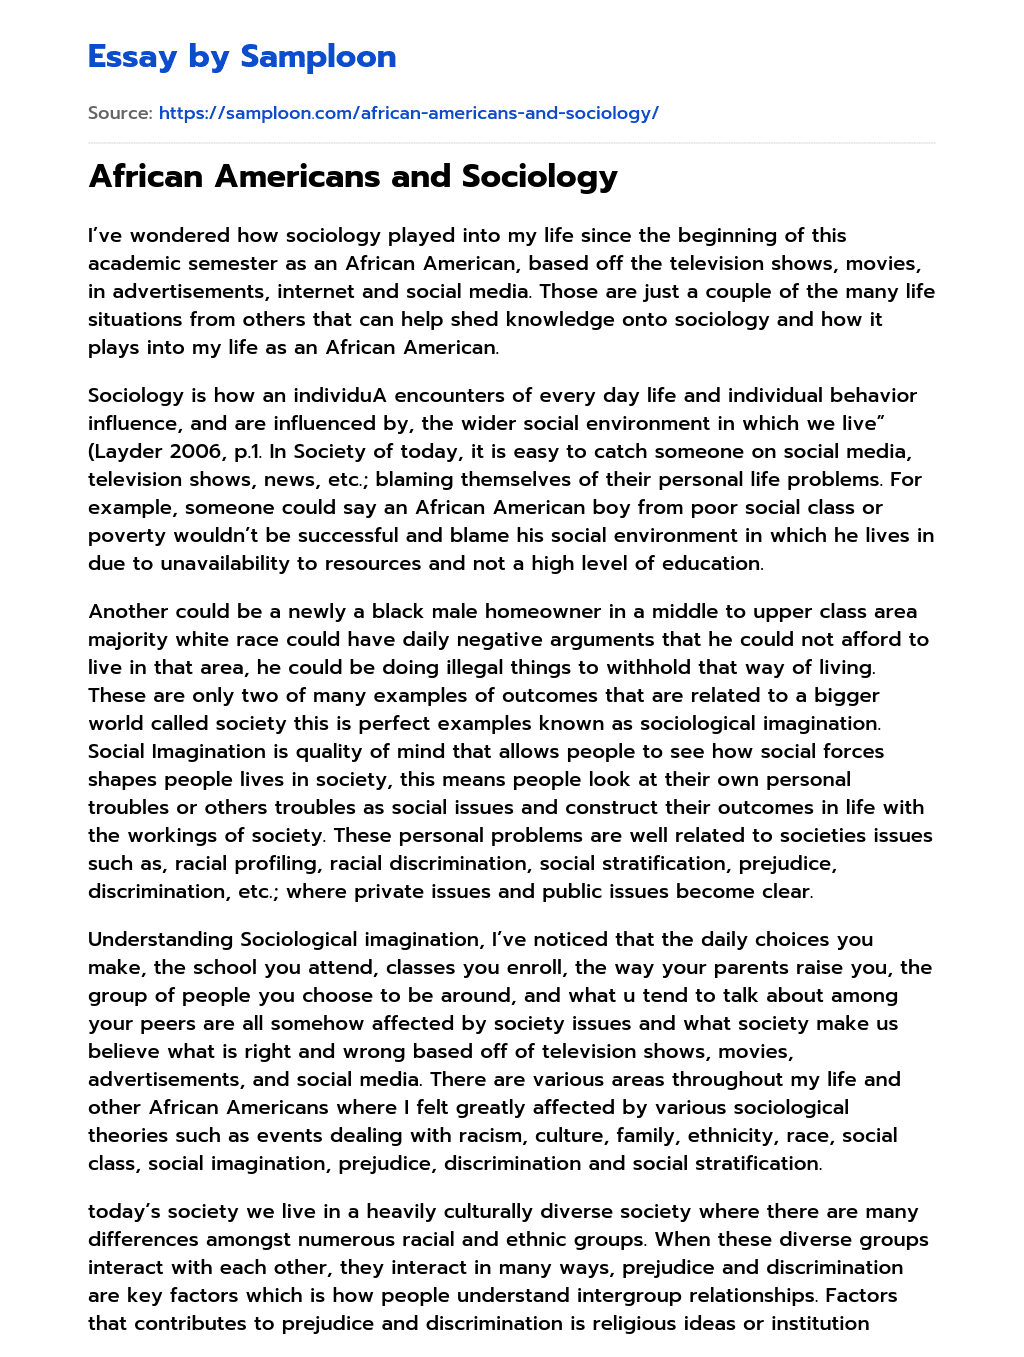 African Americans and Sociology essay